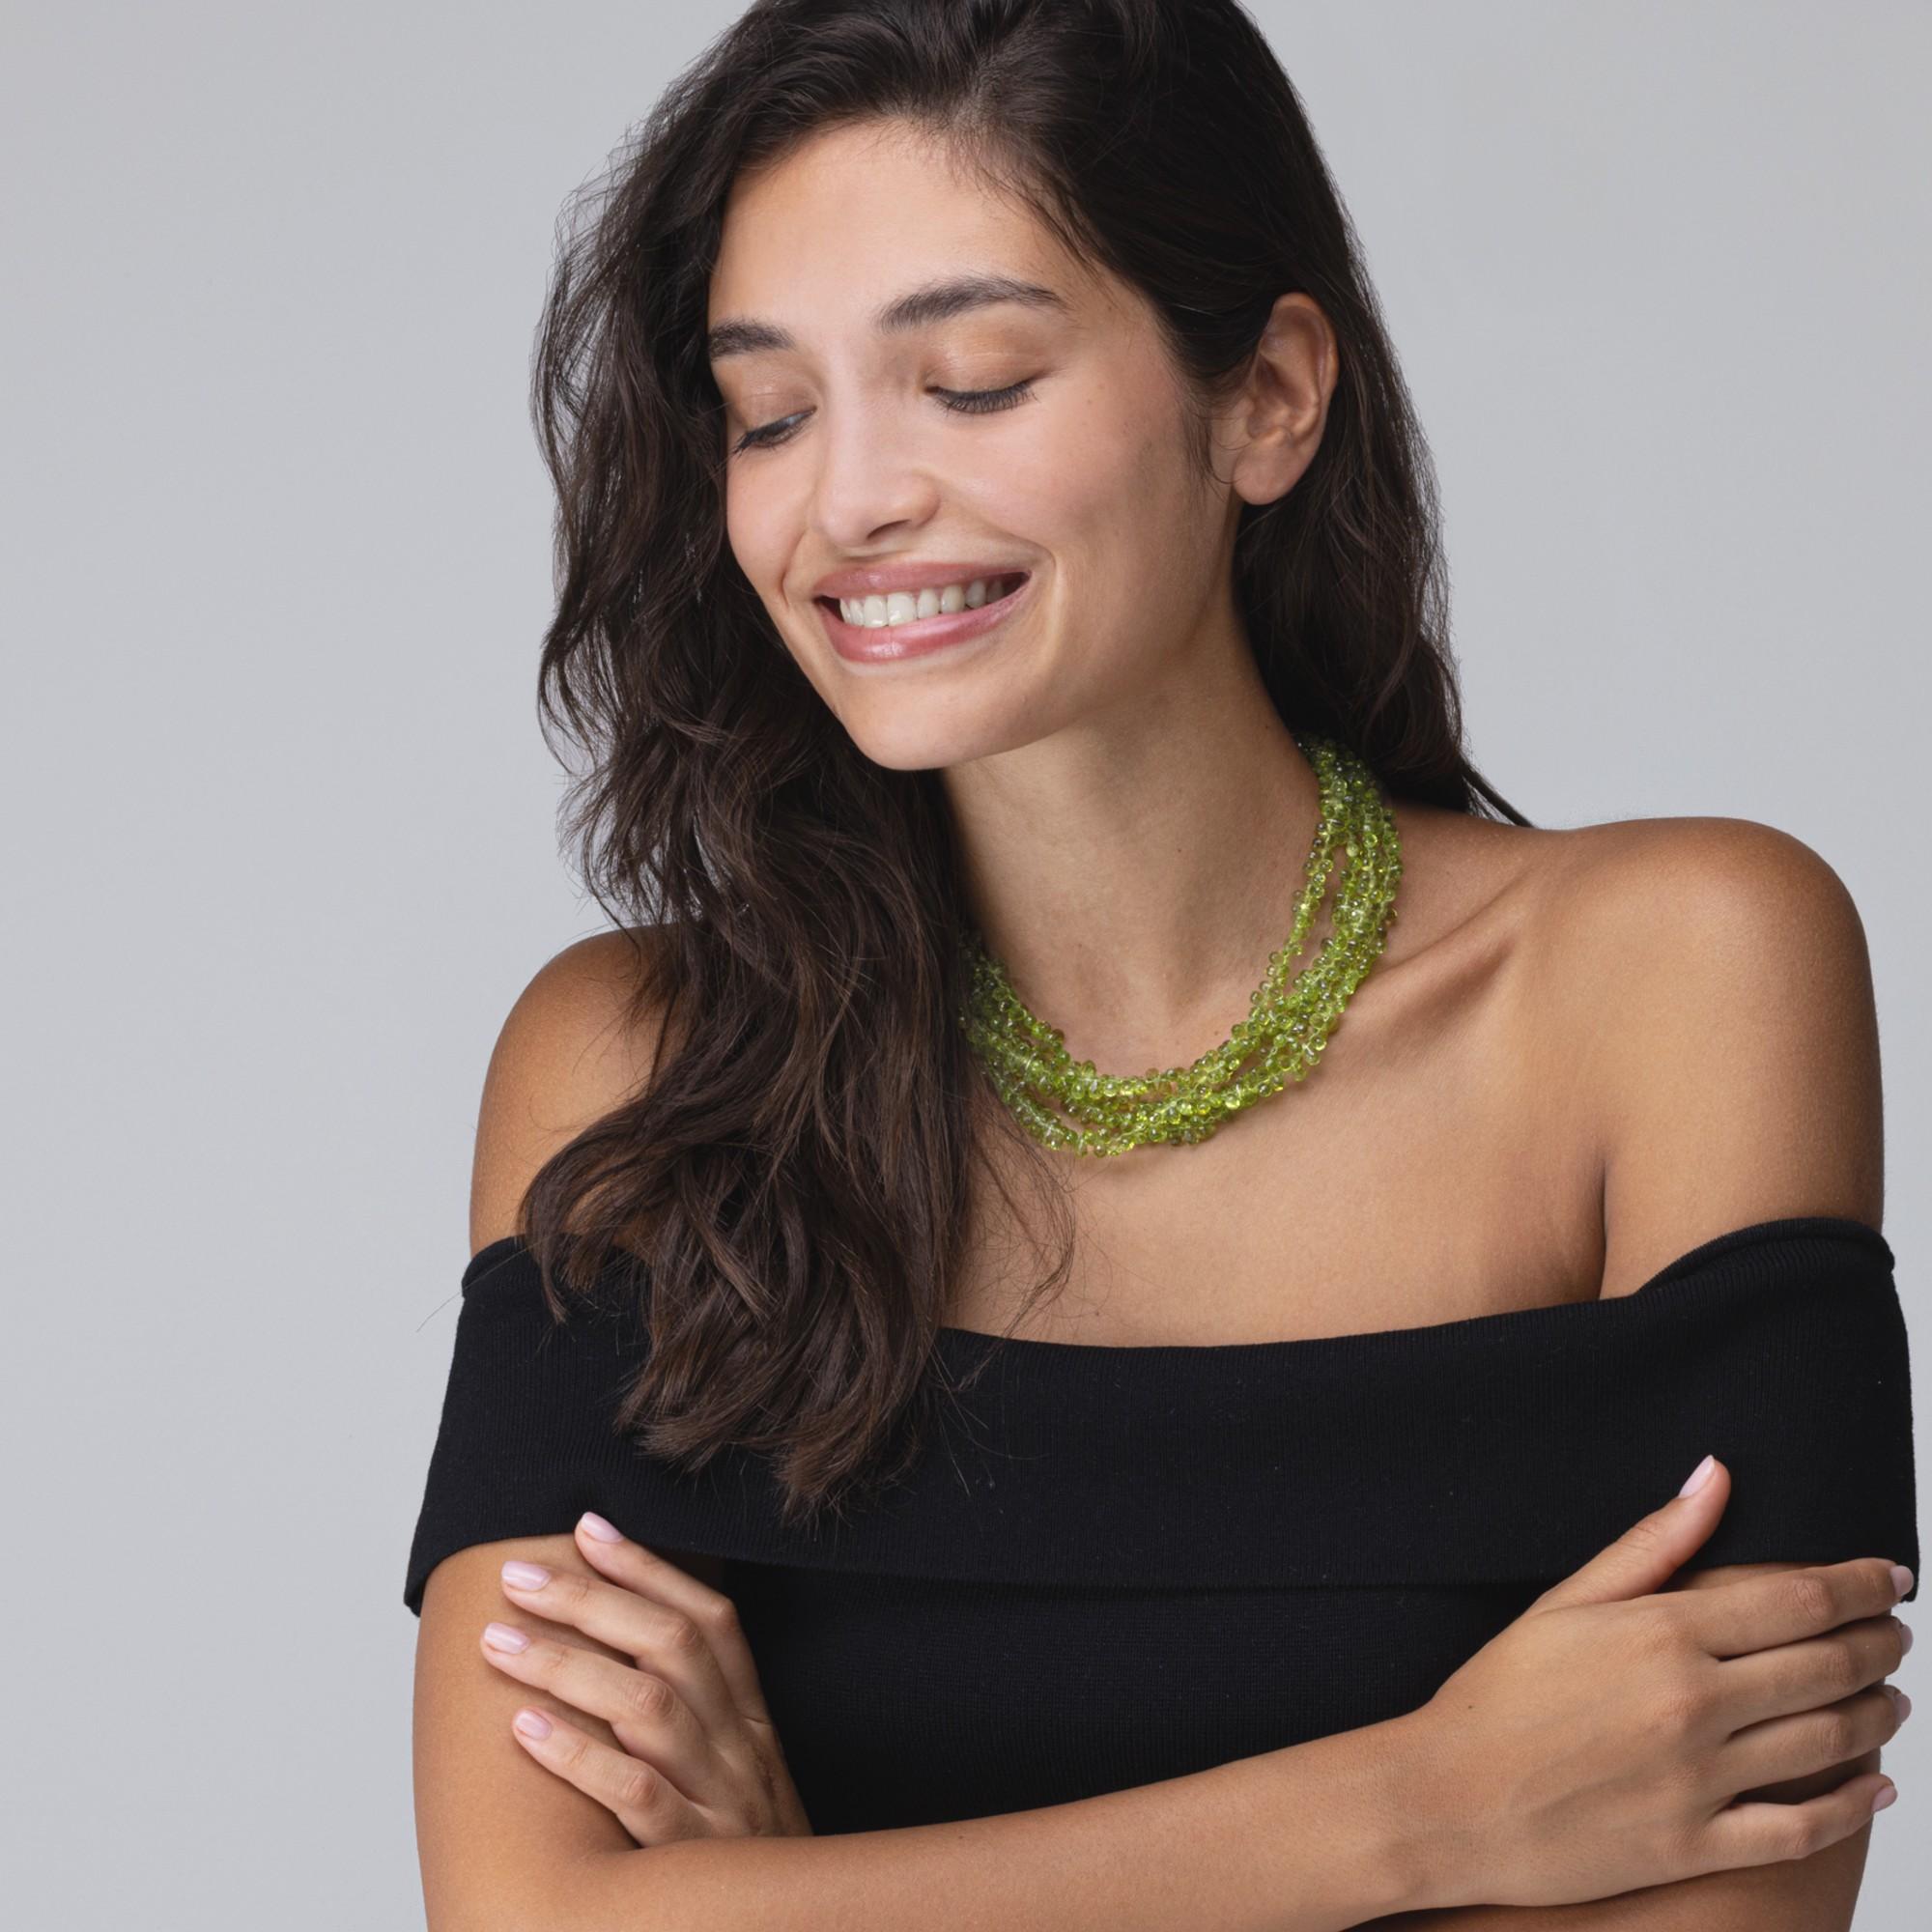 Alex Jona design collection, hand crafted in Italy, 18 karat yellow gold multi-strand necklace of peridots 18 karat yellow gold .

Alex Jona jewels stand out, not only for their special design and for the excellent quality of the gemstones, but also